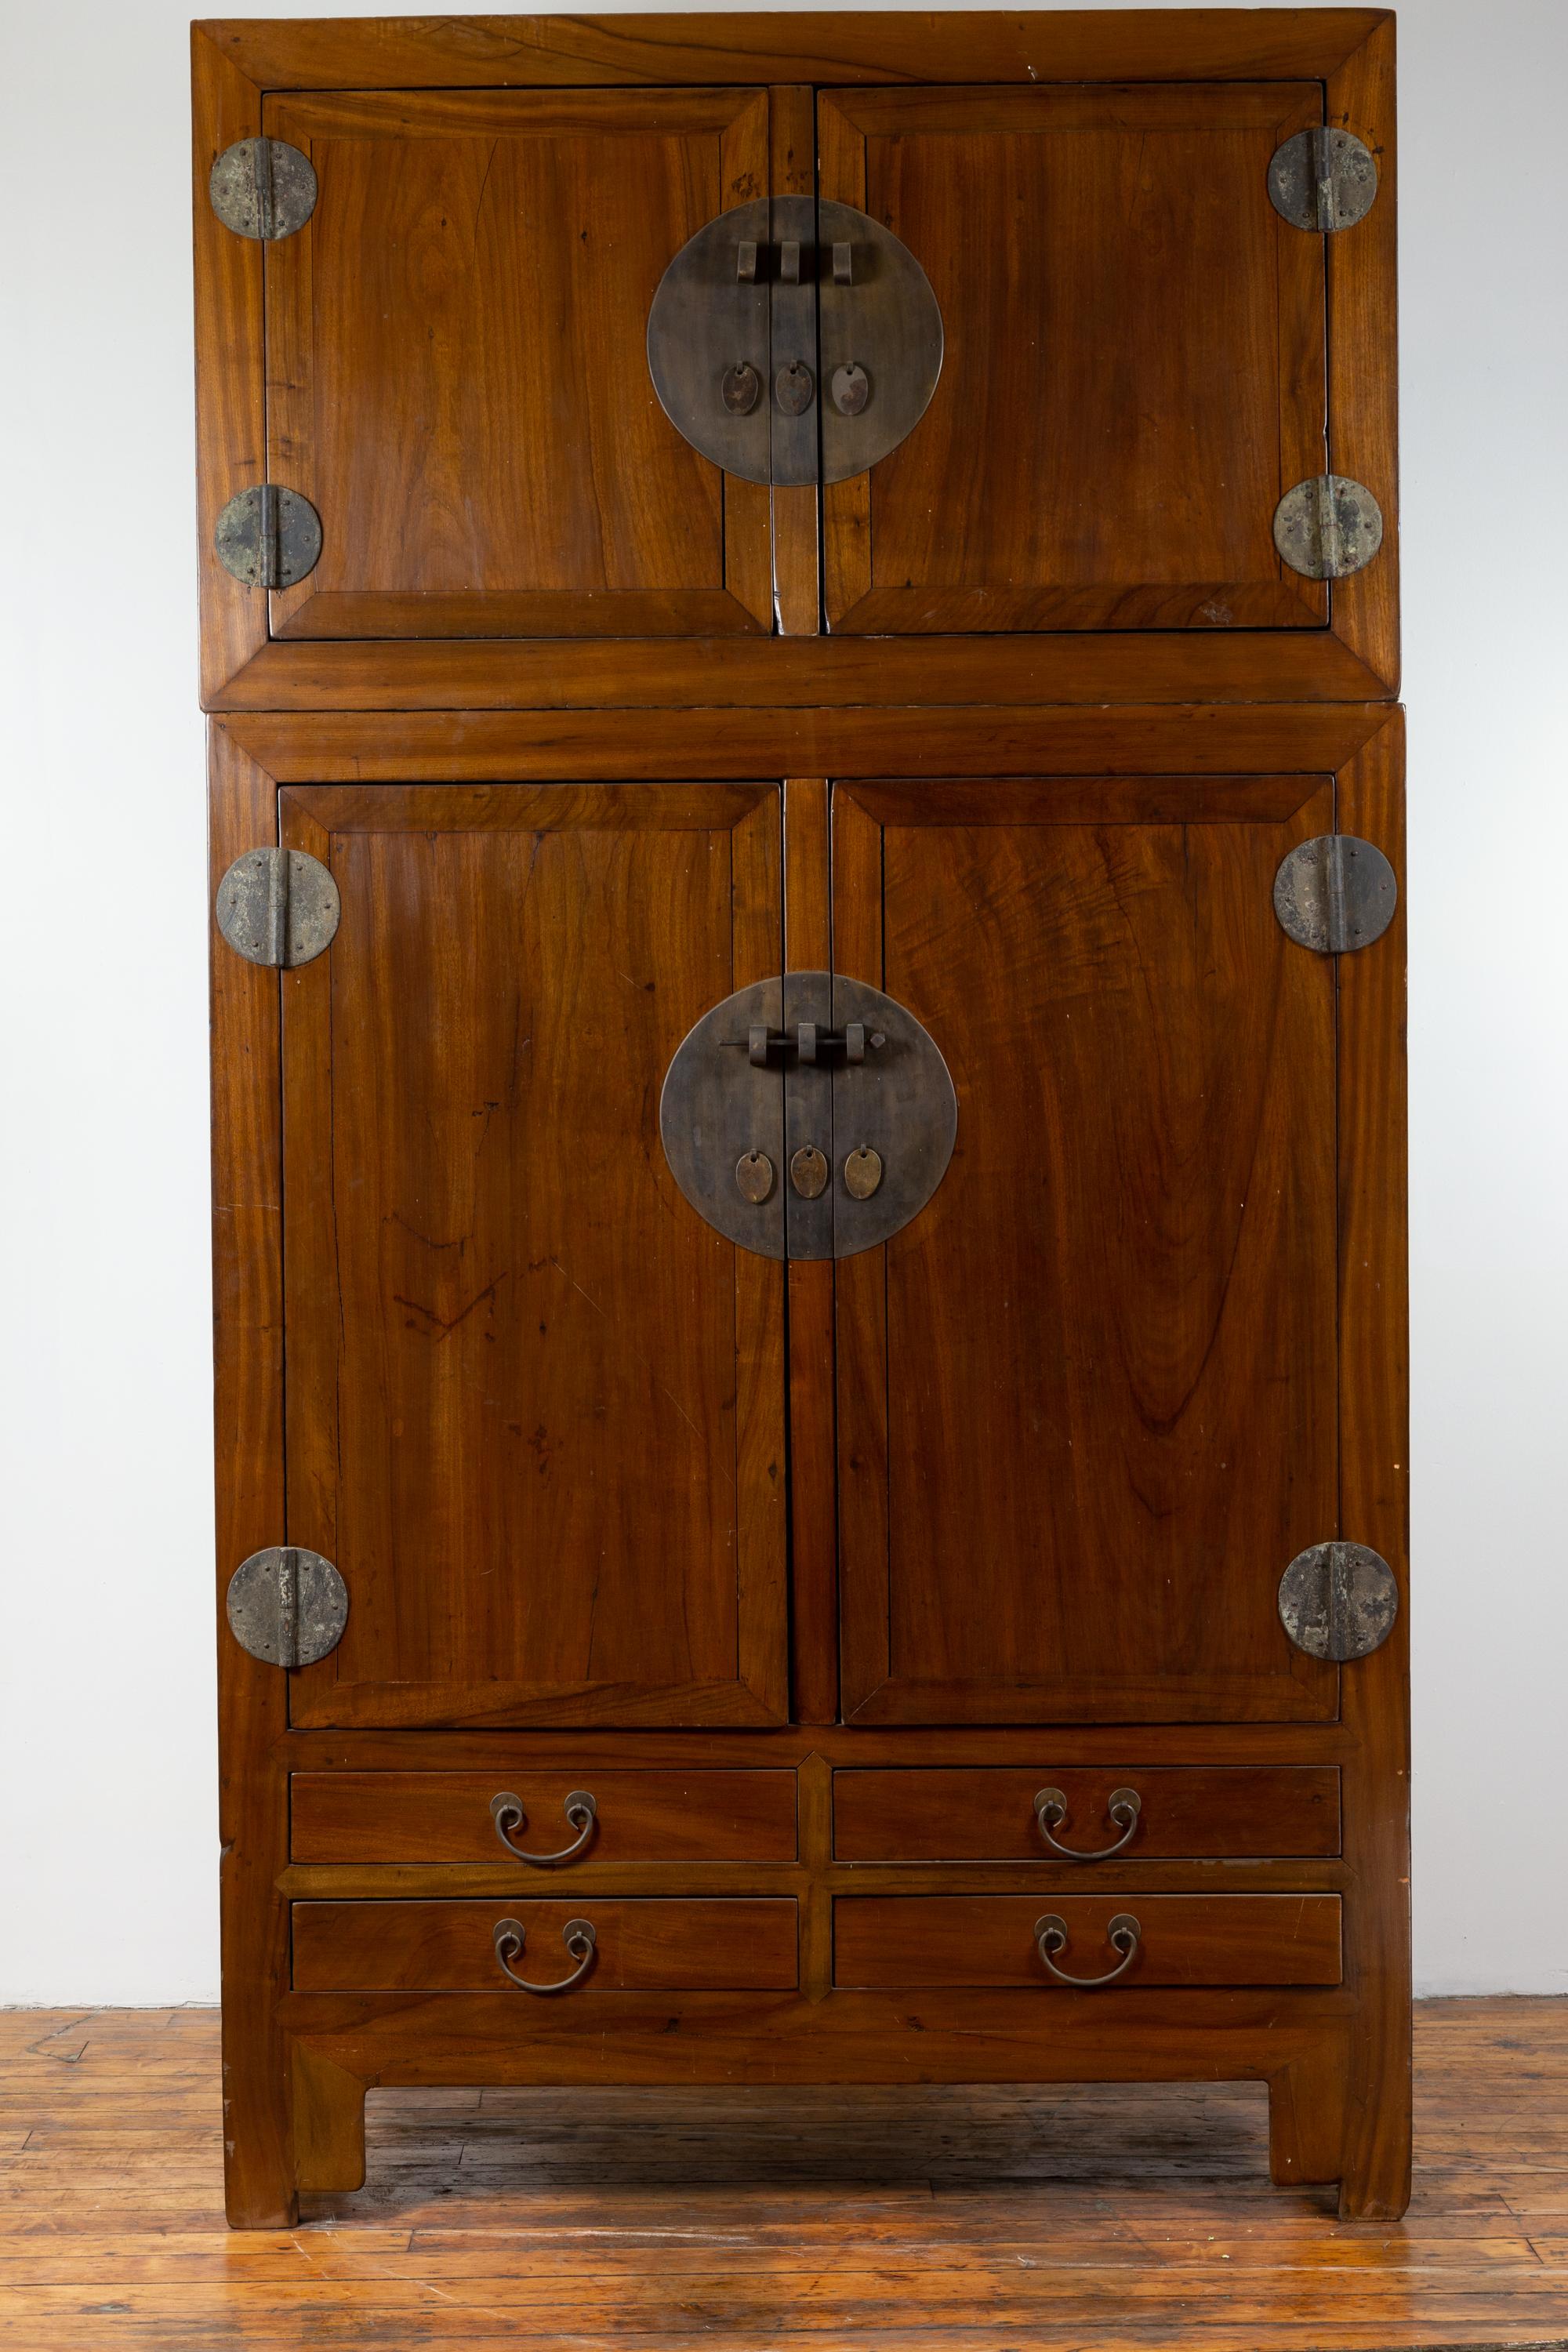 A Chinese vintage elmwood compound wedding wardrobe in two parts, with two sets of double doors, lower drawers and metal hinges. Born in China during the mid-20th century, this large elm compound wardrobe features a small upper cabinet presenting a